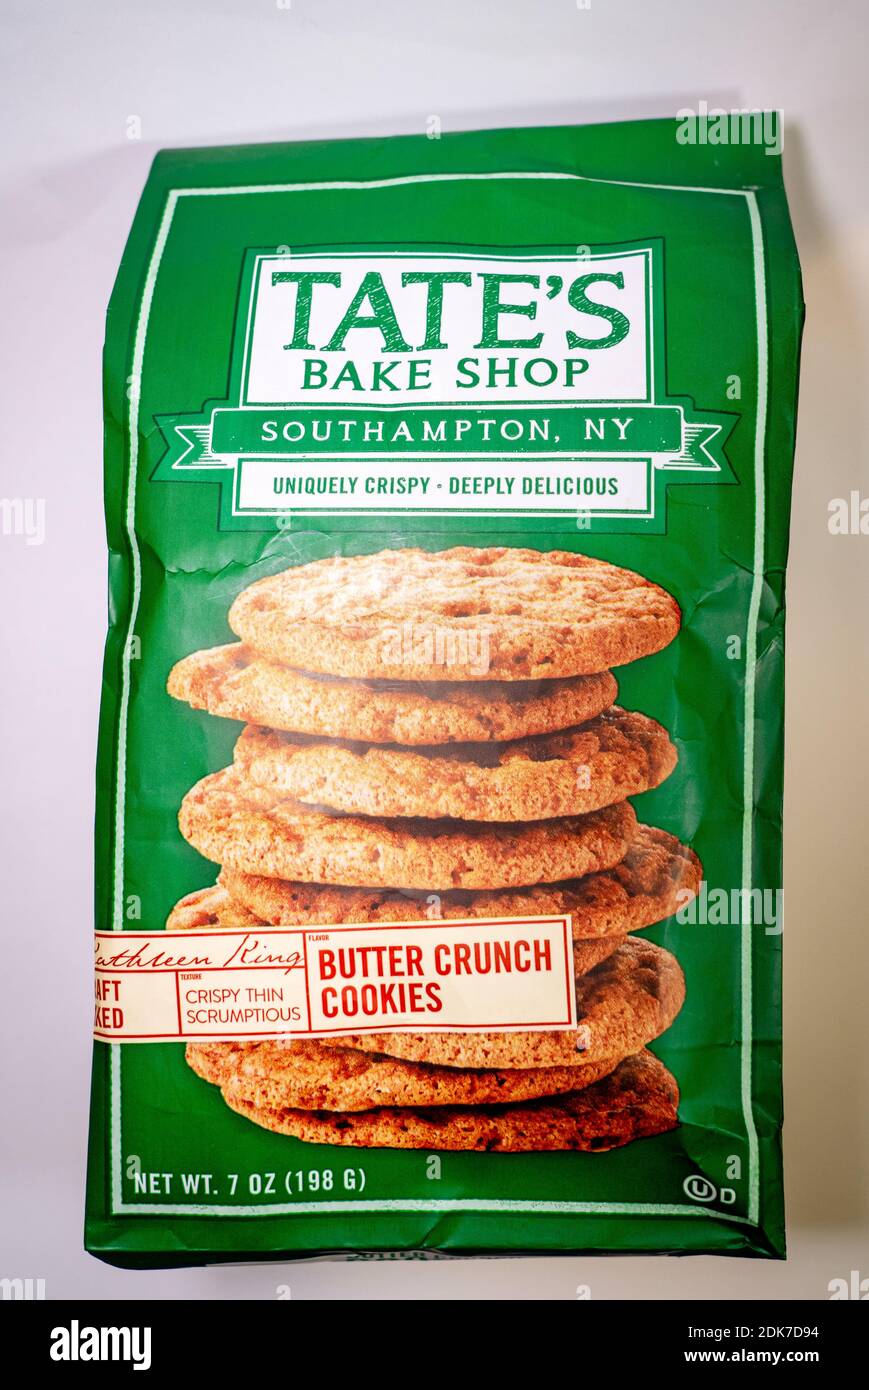 A packet of Tate's Bake Shop Butter Crunch Cookies. Stock Photo